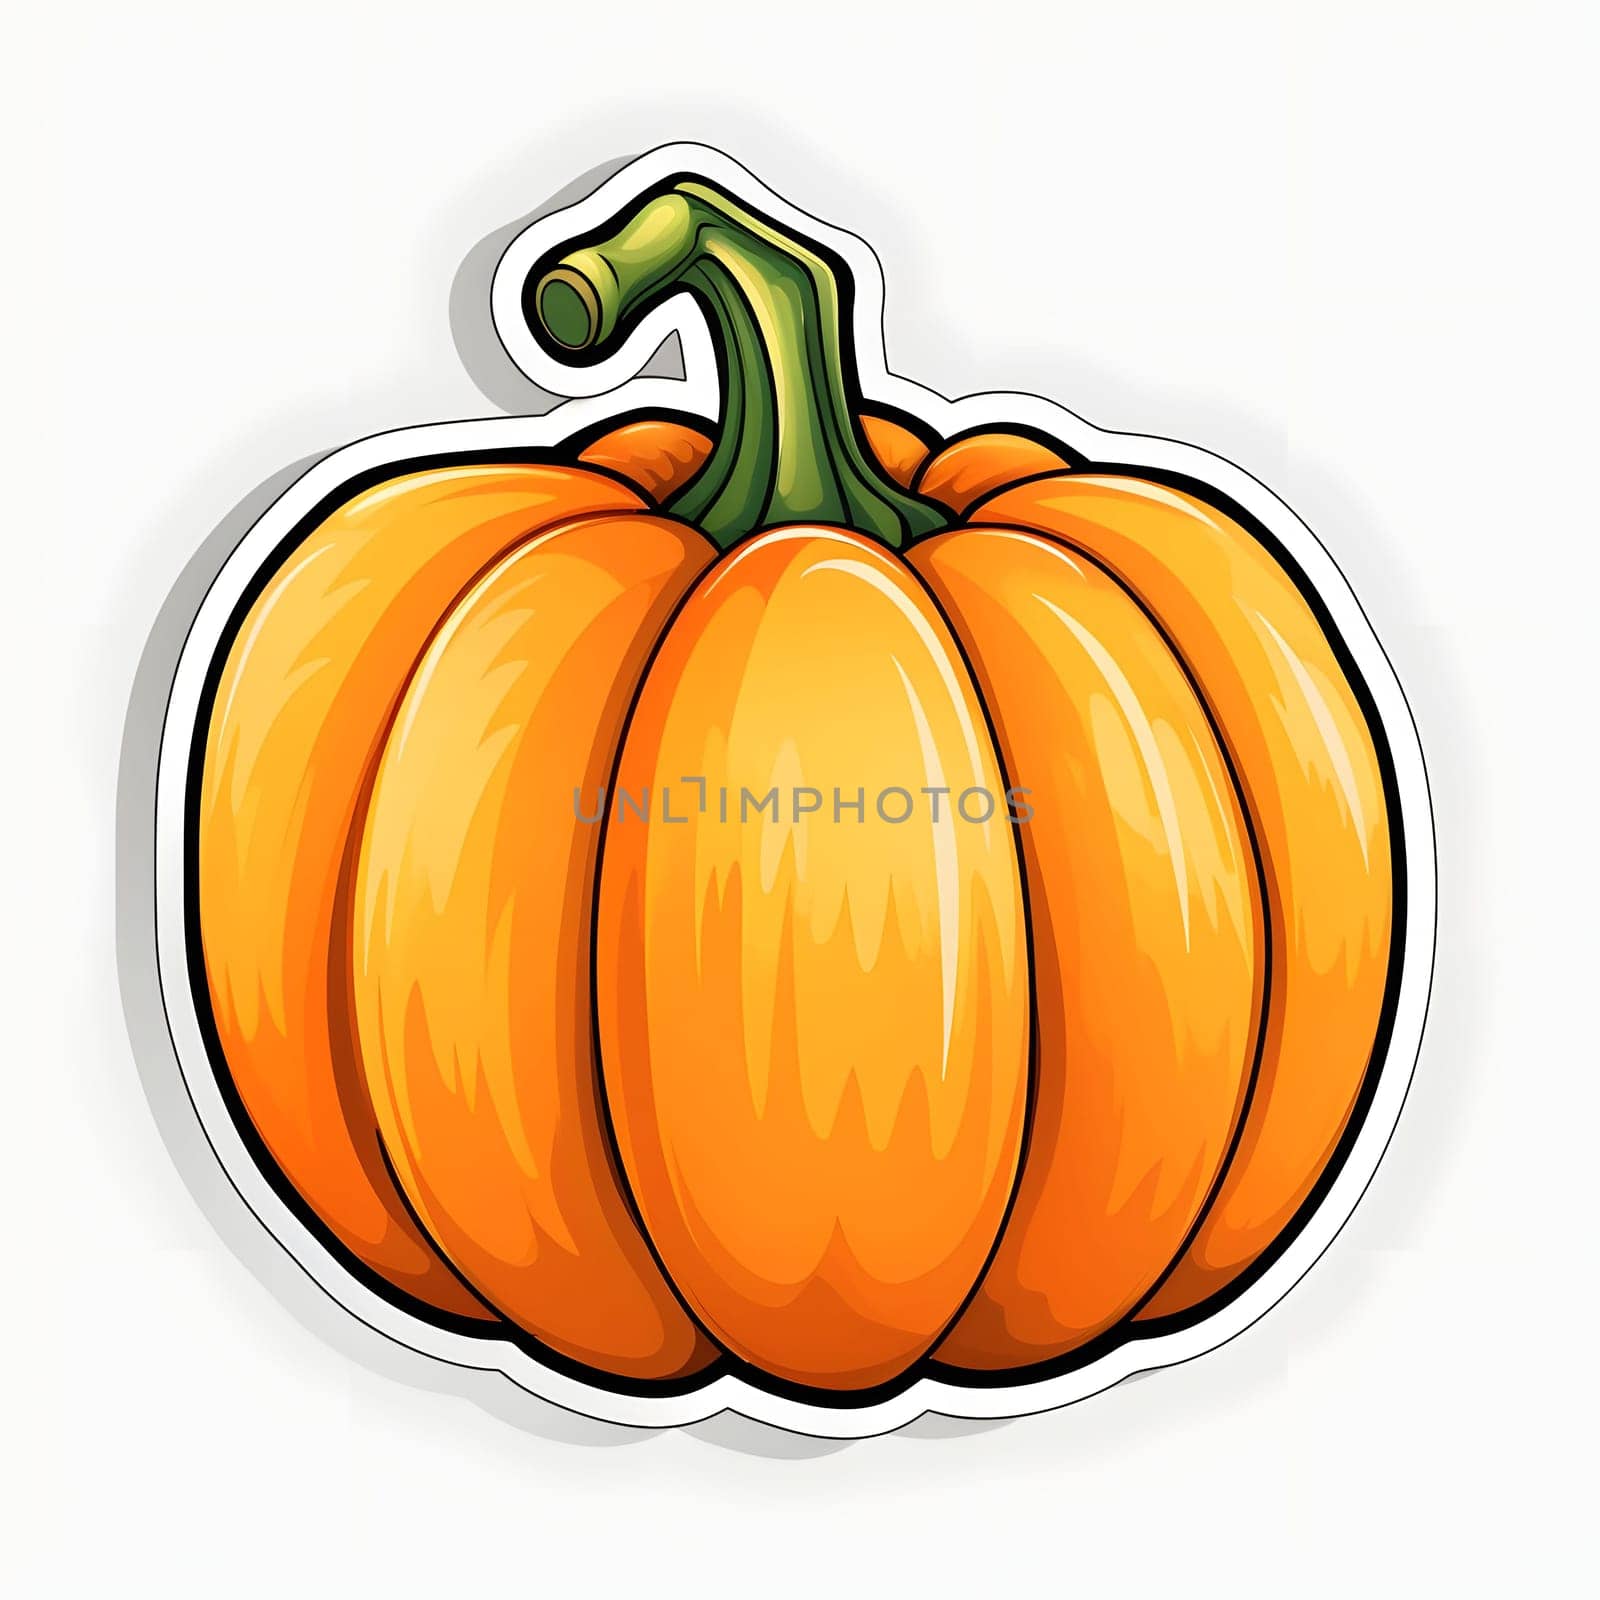 Pumpkin sticker. Pumpkin as a dish of thanksgiving for the harvest, picture on a white isolated background. An atmosphere of joy and celebration.